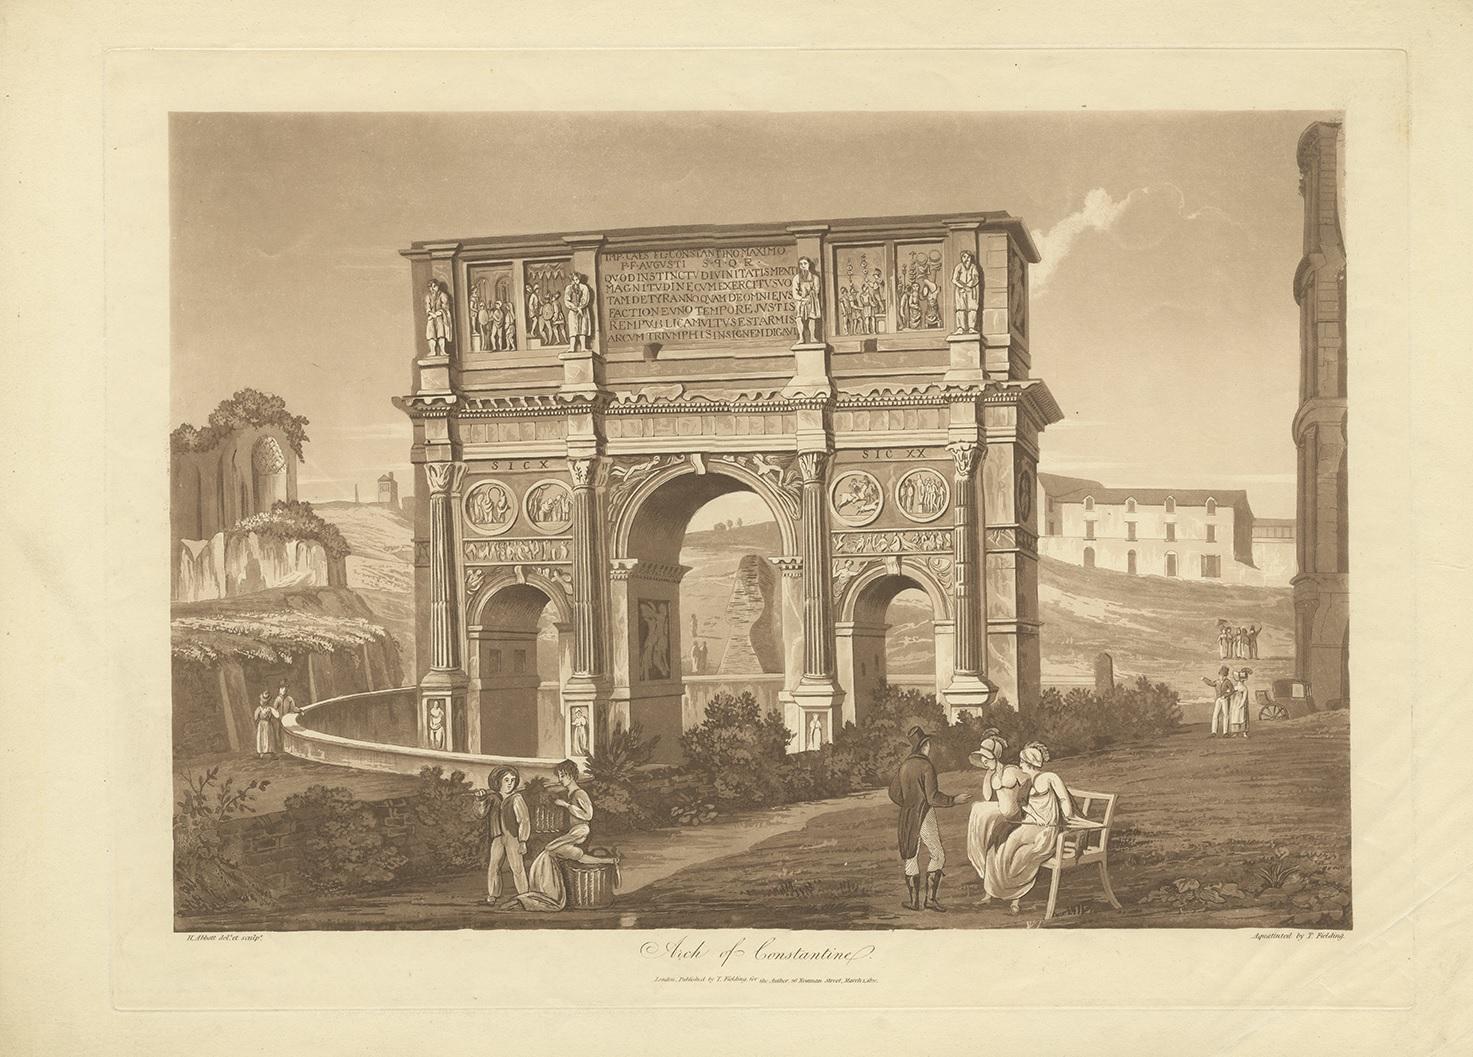 Antique print titled 'Arch of Constantine'. Large aquatint of the Arch of Constantine. The Arch of Constantine is a triumphal arch in Rome dedicated to the emperor Constantine the Great. The arch was commissioned by the Roman Senate to commemorate